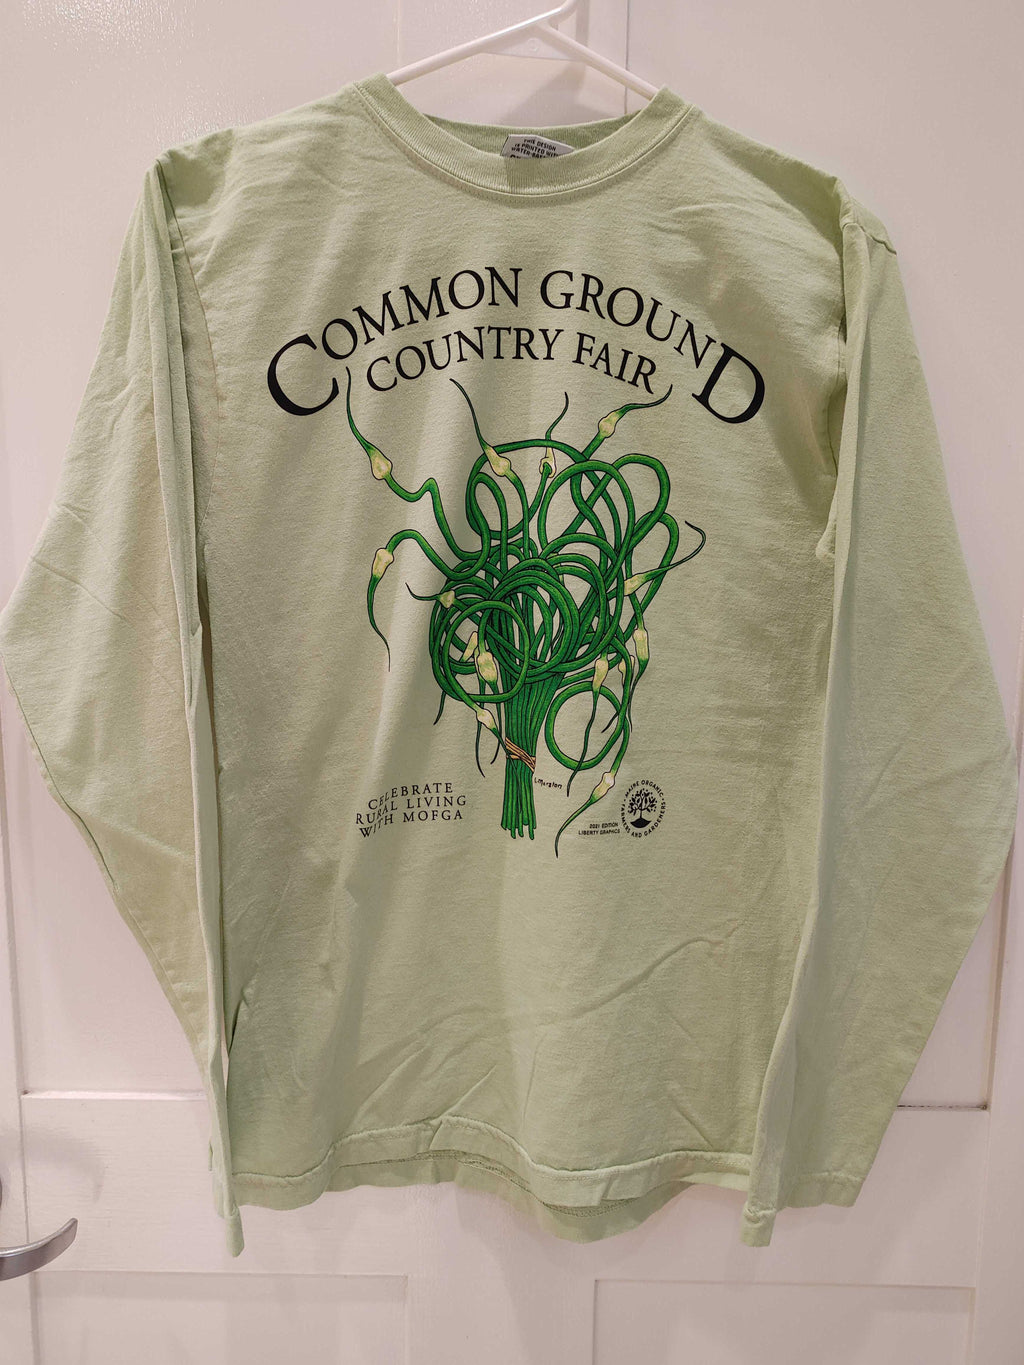 A light brown long sleeved shirt with artwork in the center depicting a cluster of green and cream garlic scapes bound with brown twine at the bottom. Black text around art reads “Common Ground Country Fair” and  “Celebrate Rural Living with MOFGA”. A black MOFGA logo is in the bottom right corner. 